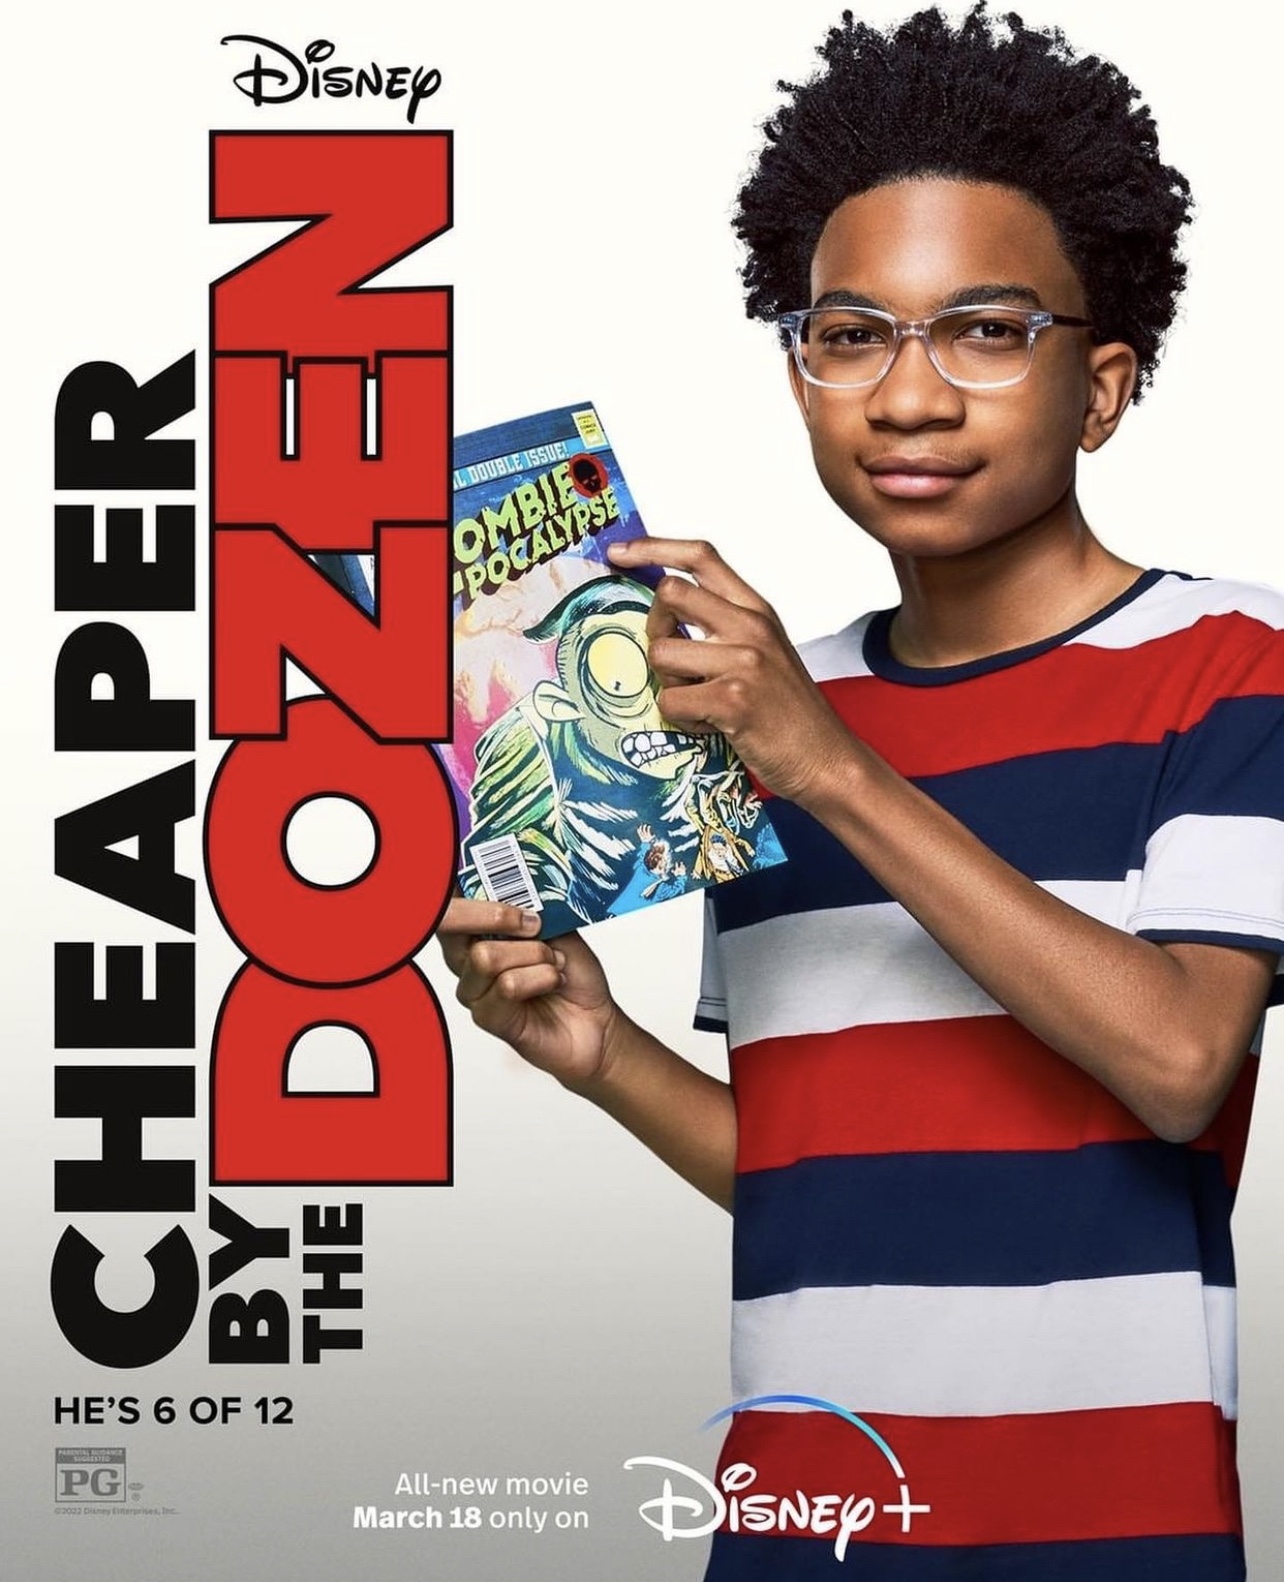 Interview with Andre Robinson from Cheaper by the Dozen